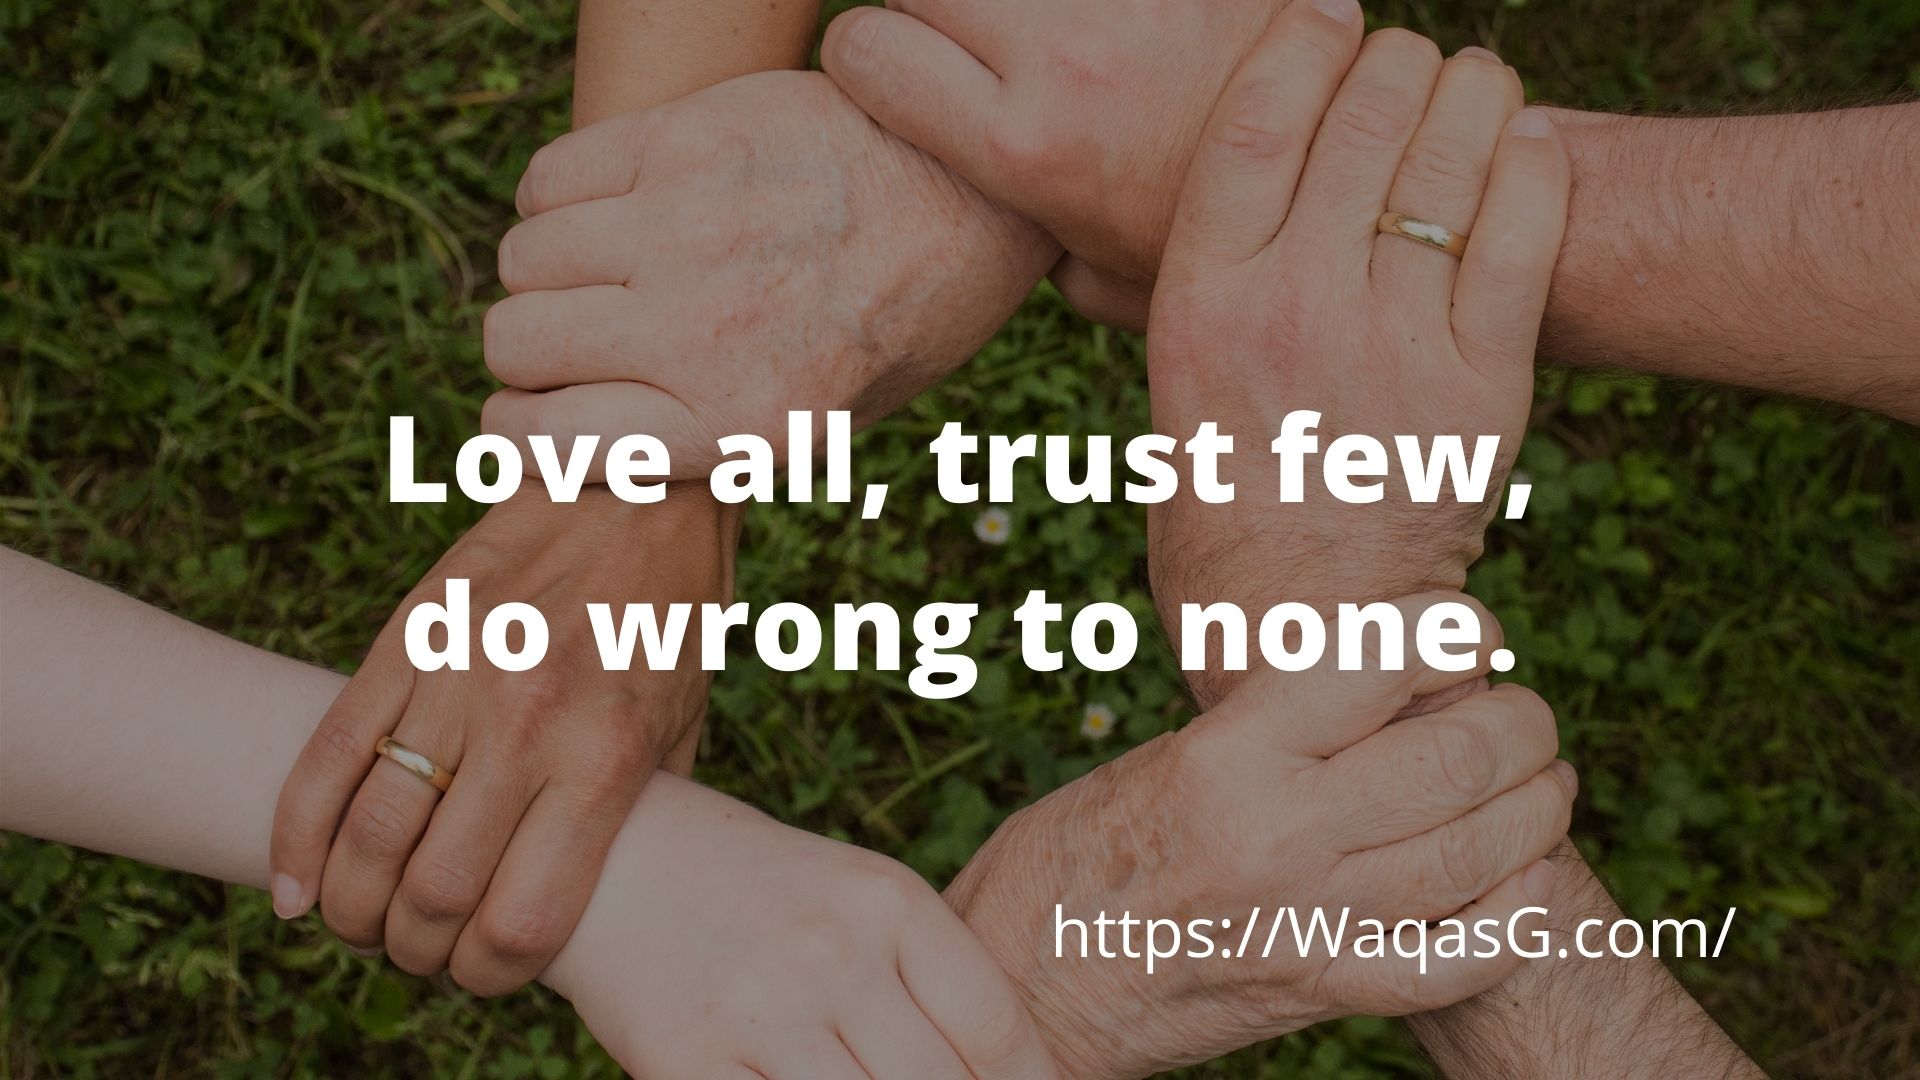 Love all, trust few, do wrong to none.